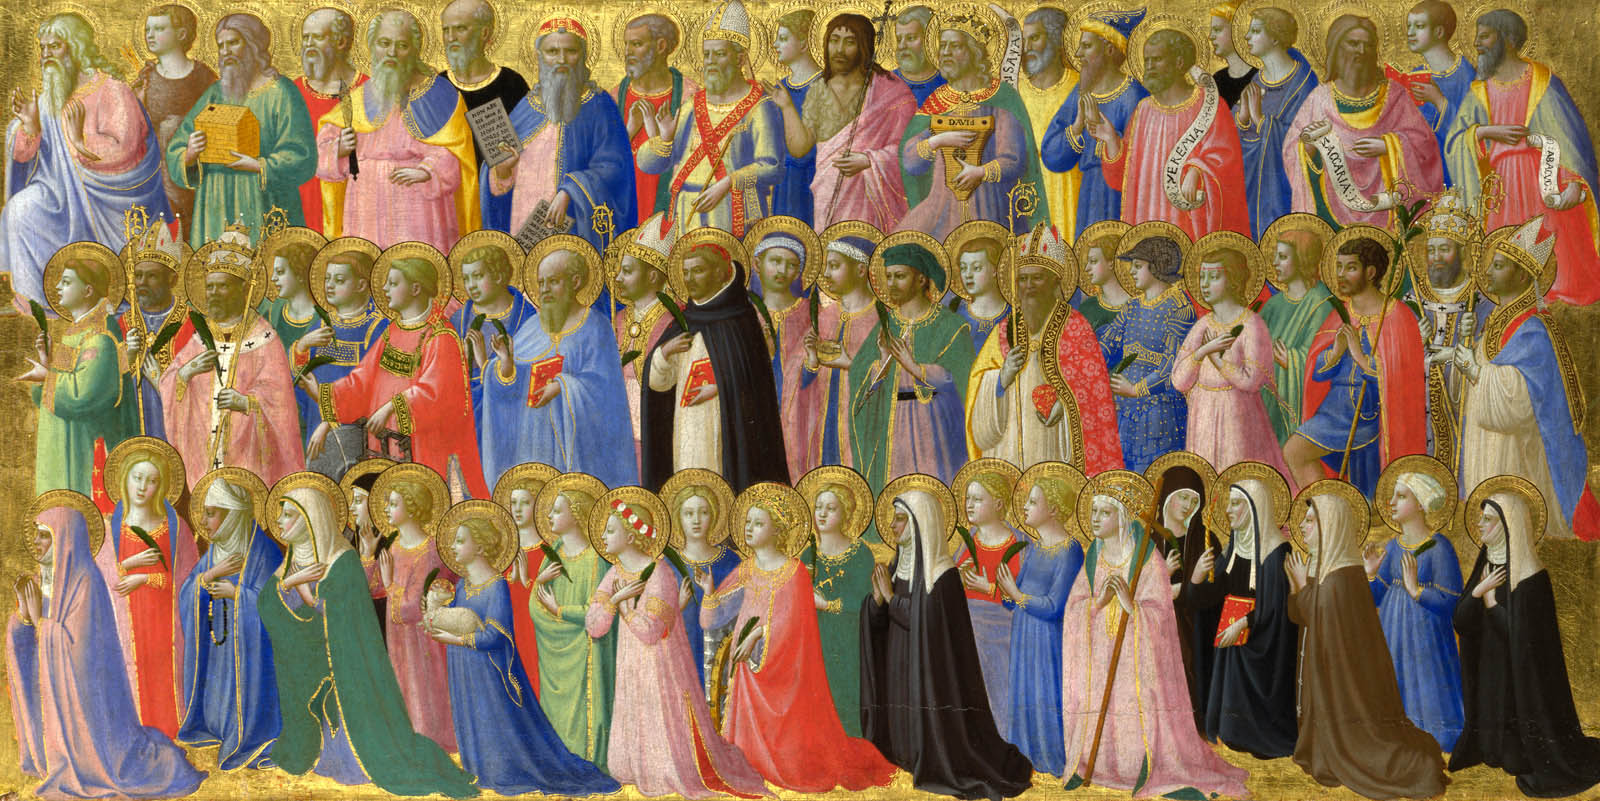 The Forerunners of Christ with Saints and Martyrs